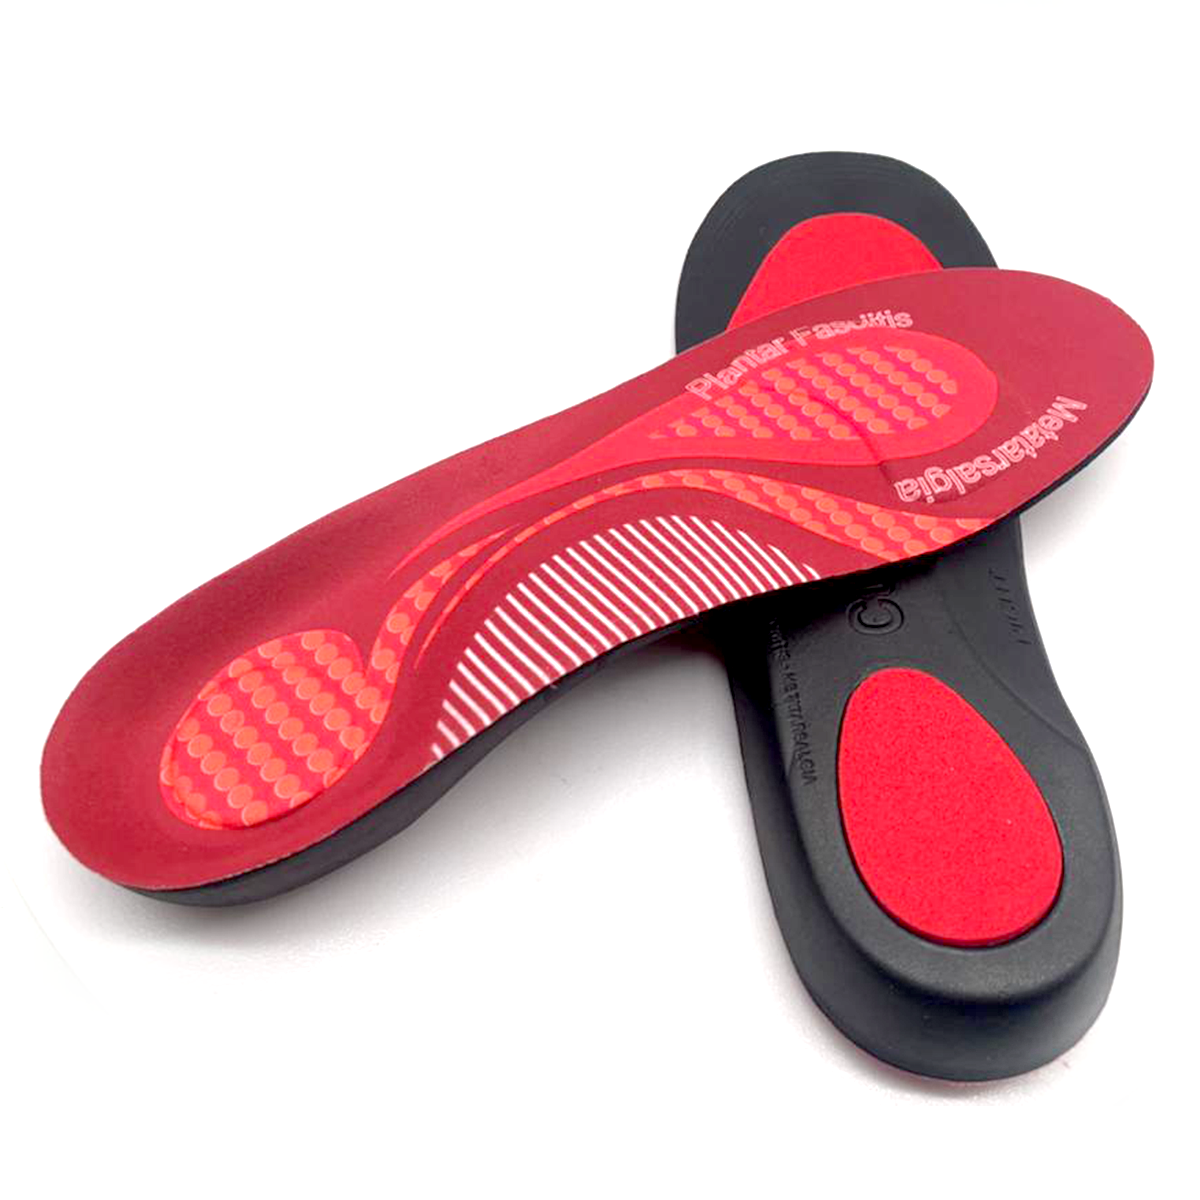 Shoe insole for plantar fasciitis